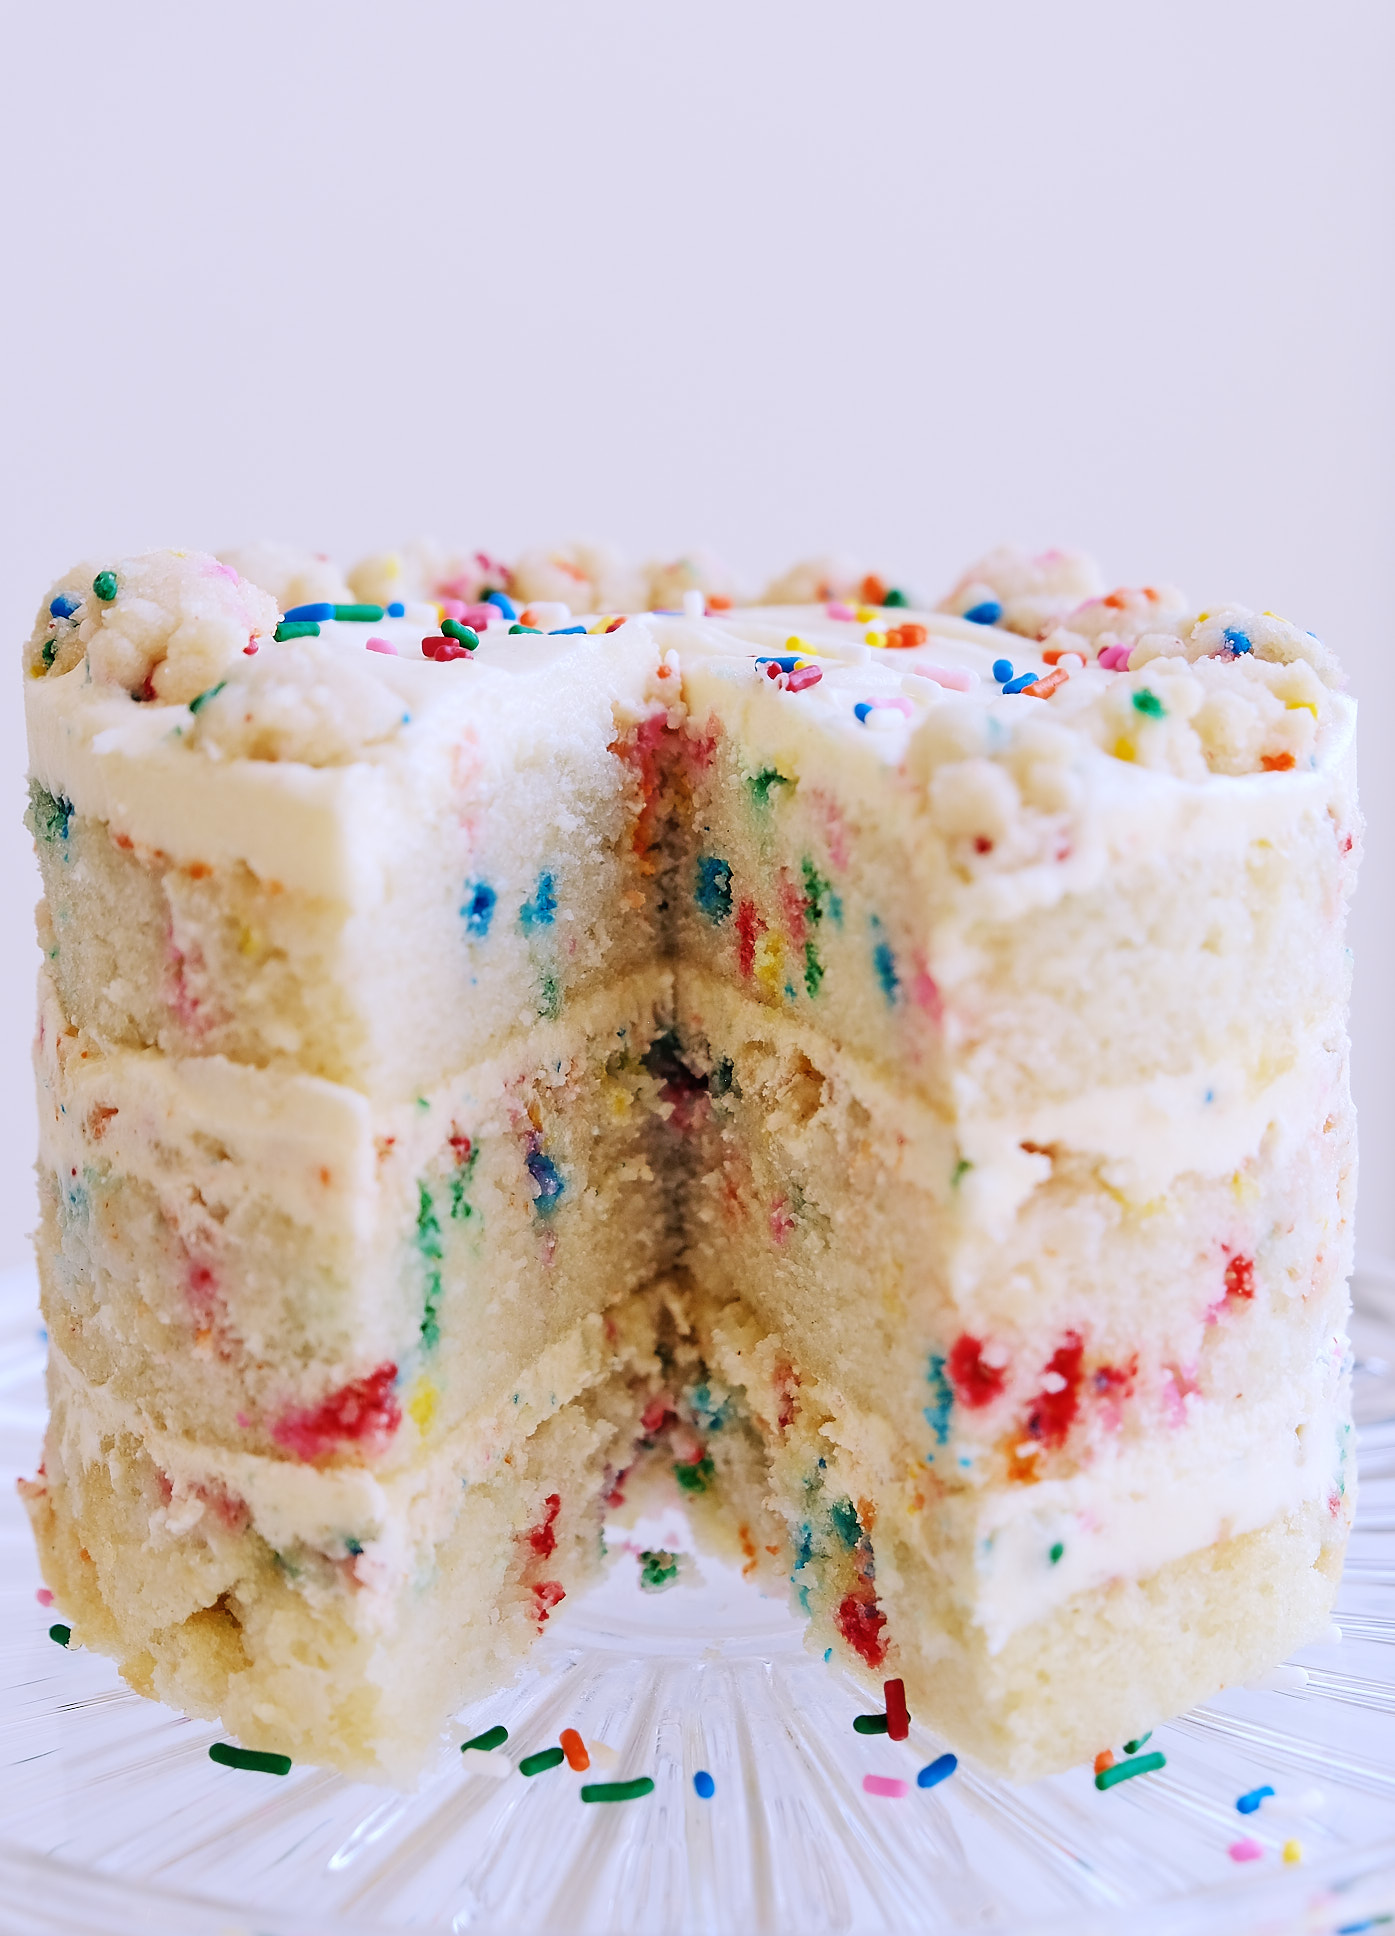 A side view of a dairy-free egg-free Milk Bar Birthday Cake on a cake stand.